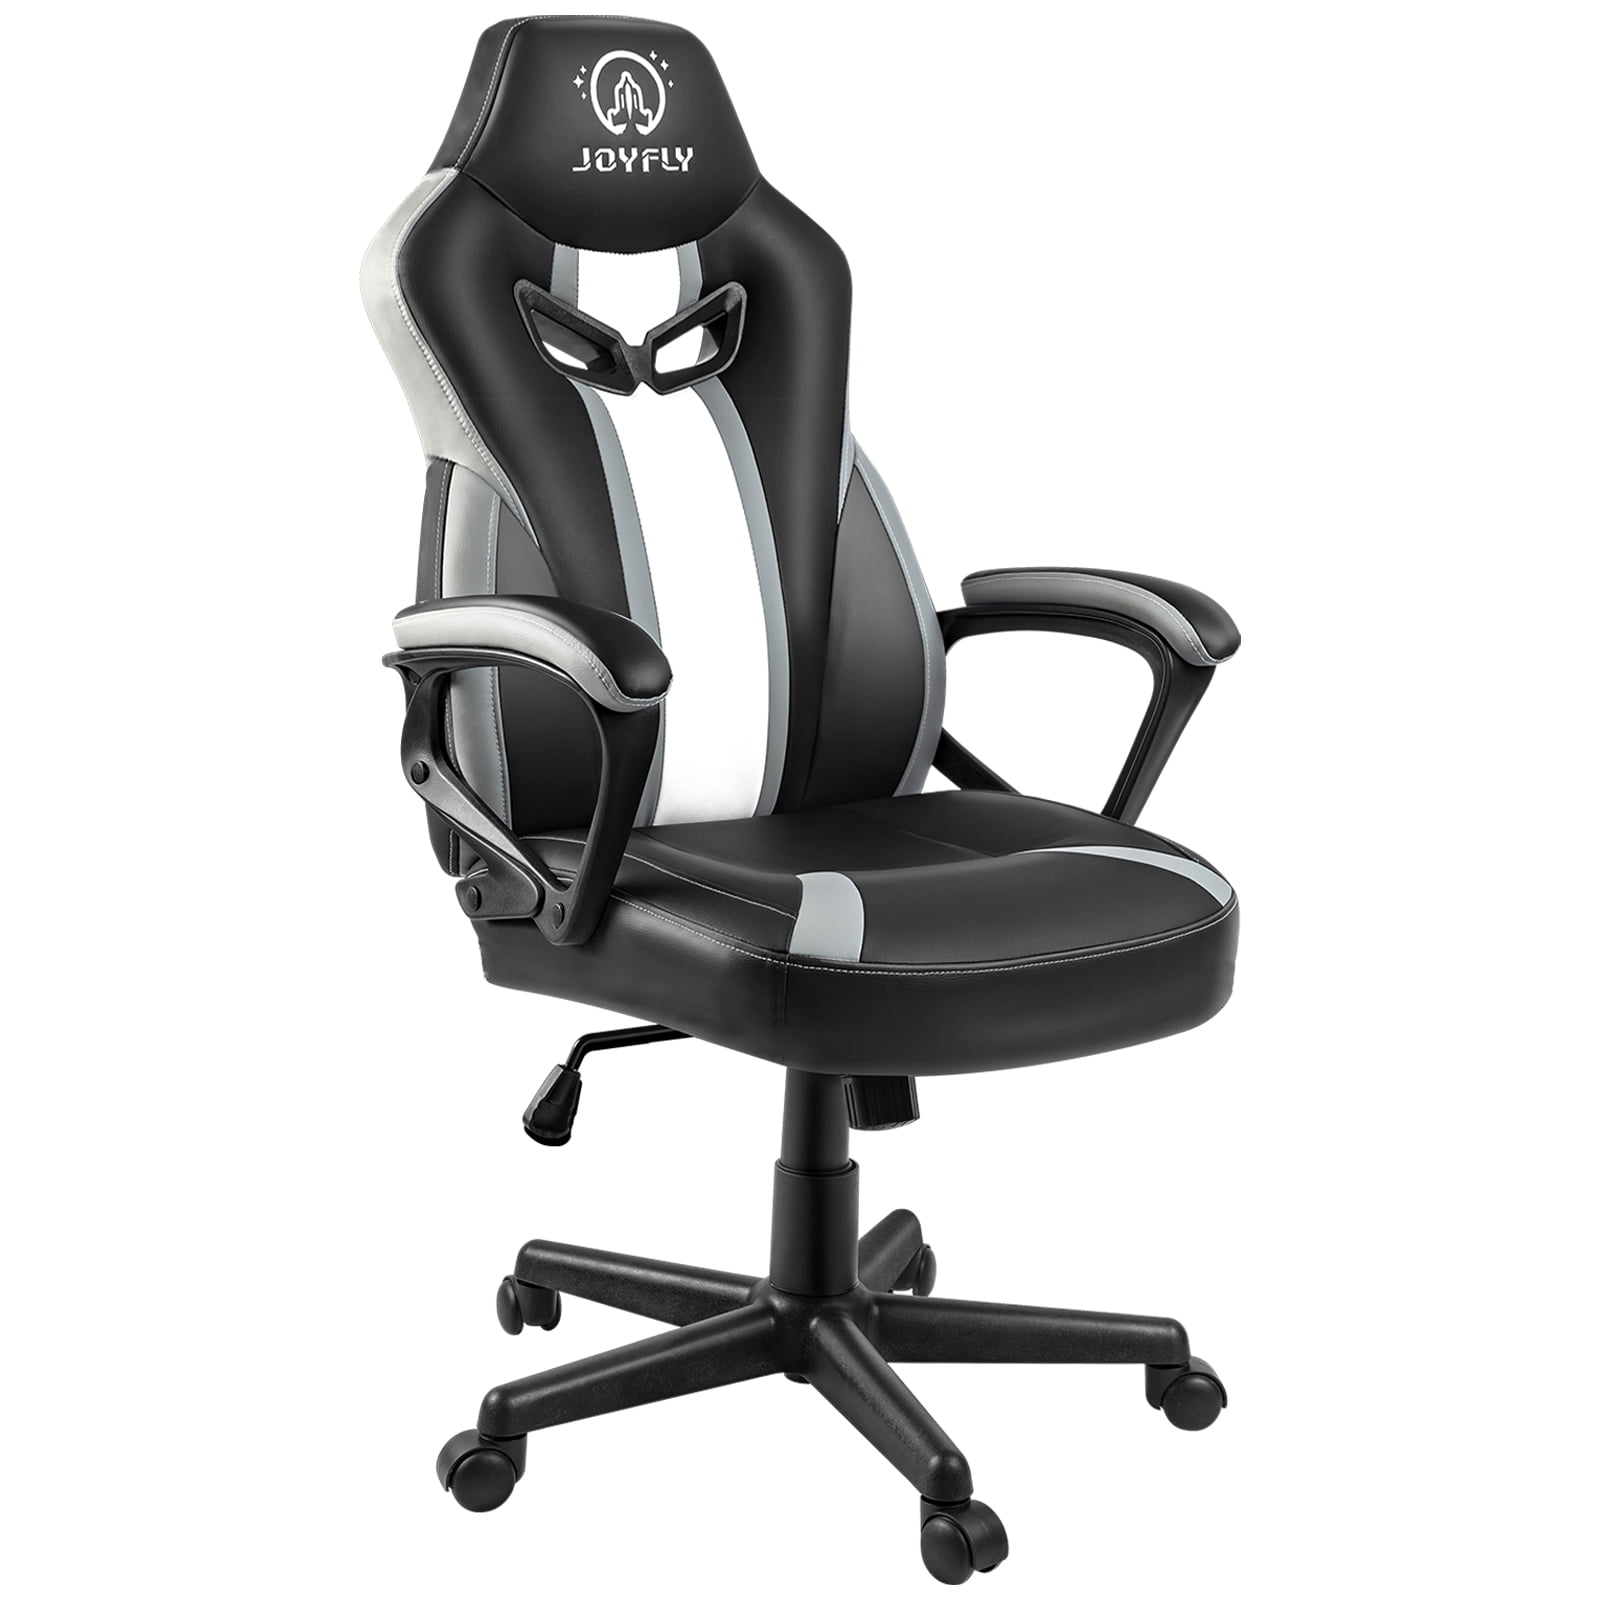  Vonesse Gaming Chair with Footrest, High Back Gamer